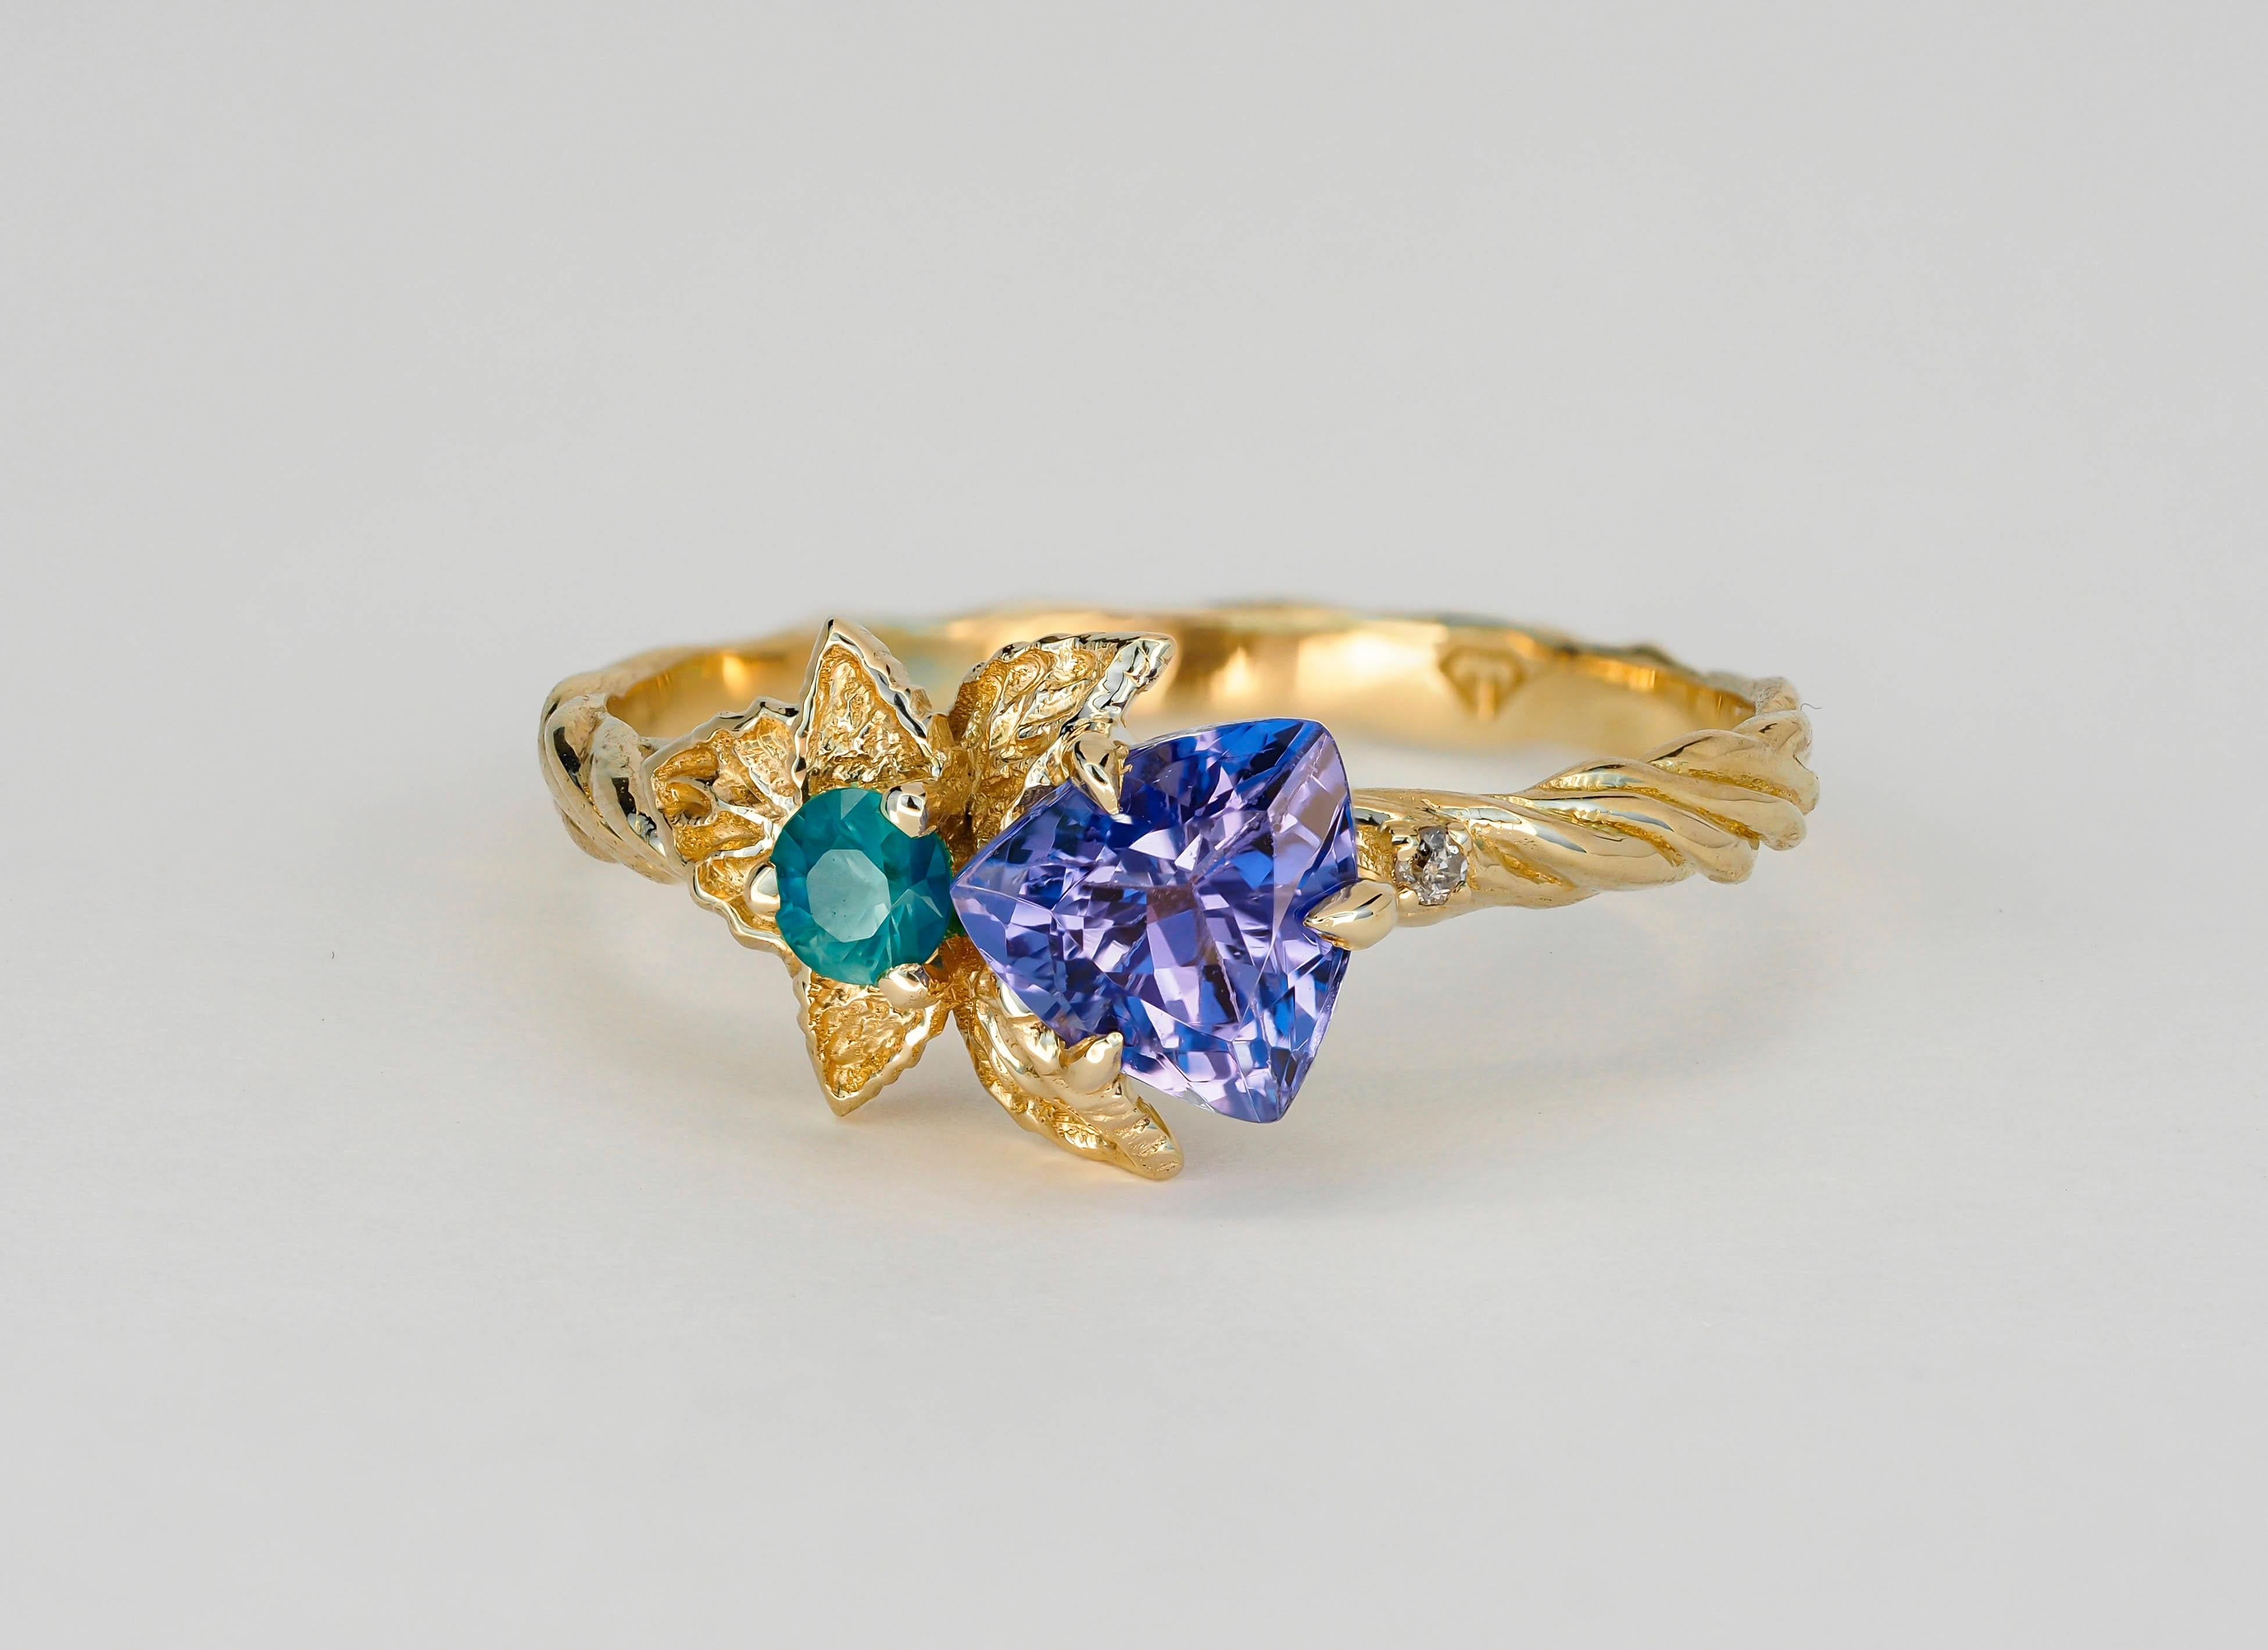 For Sale:  Tanzanite and diamonds 14k gold ring. Flower design ring with tanzanite. 13